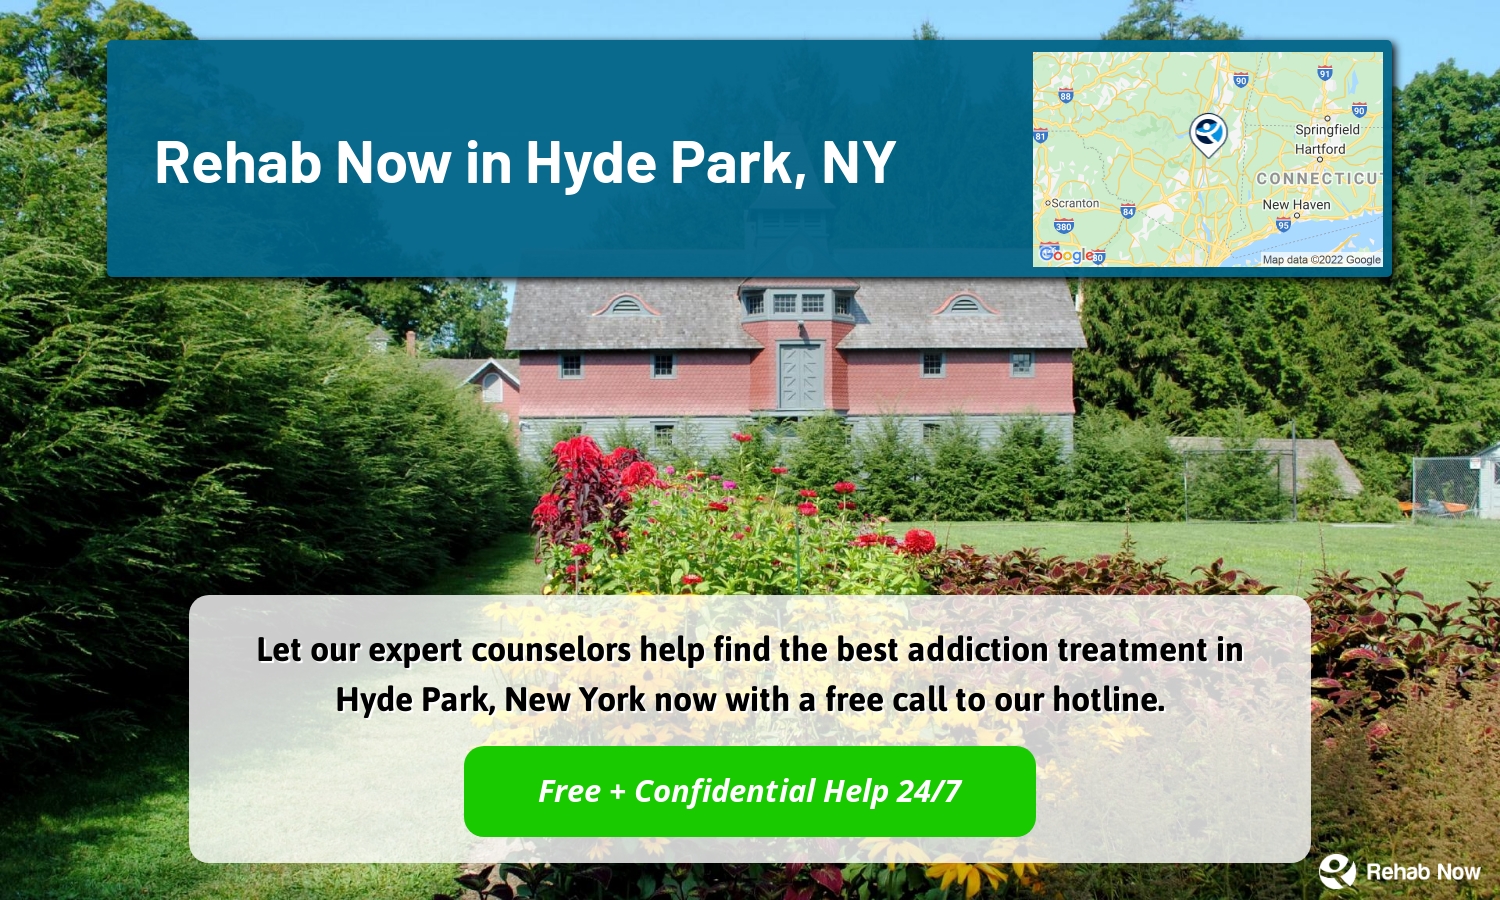 Let our expert counselors help find the best addiction treatment in Hyde Park, New York now with a free call to our hotline.